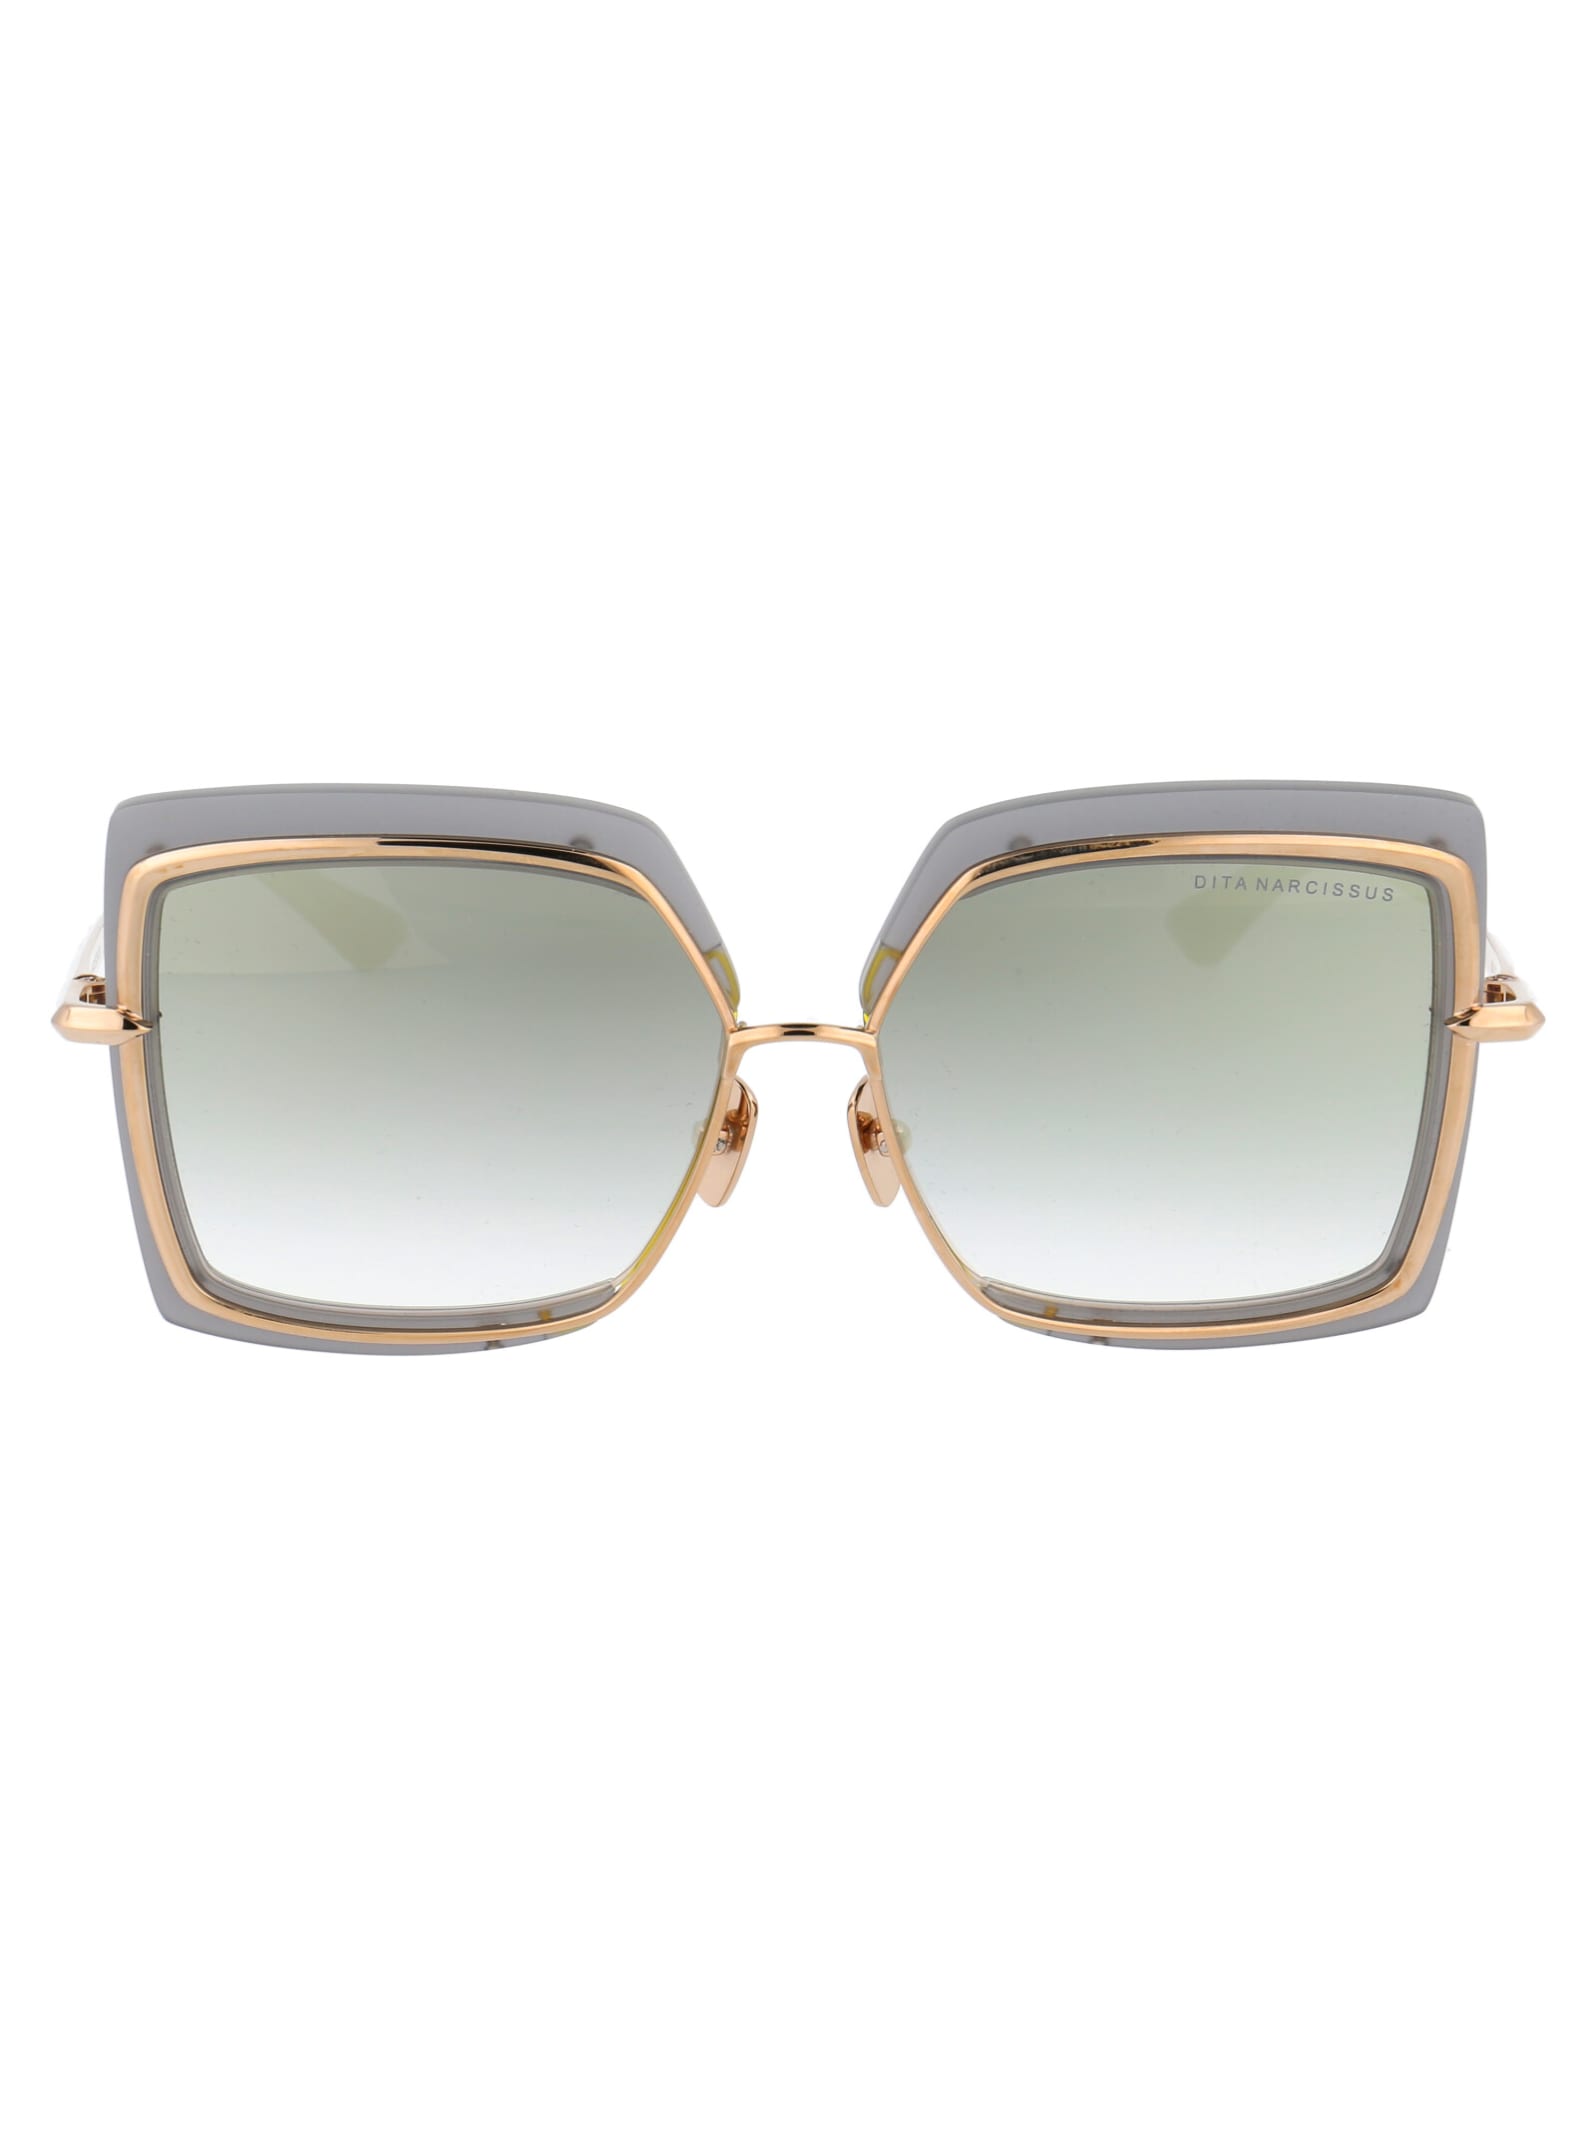 Shop Dita Narcissus Sunglasses In Satin Crystal Grey - White Gold - Milky Gold Flash